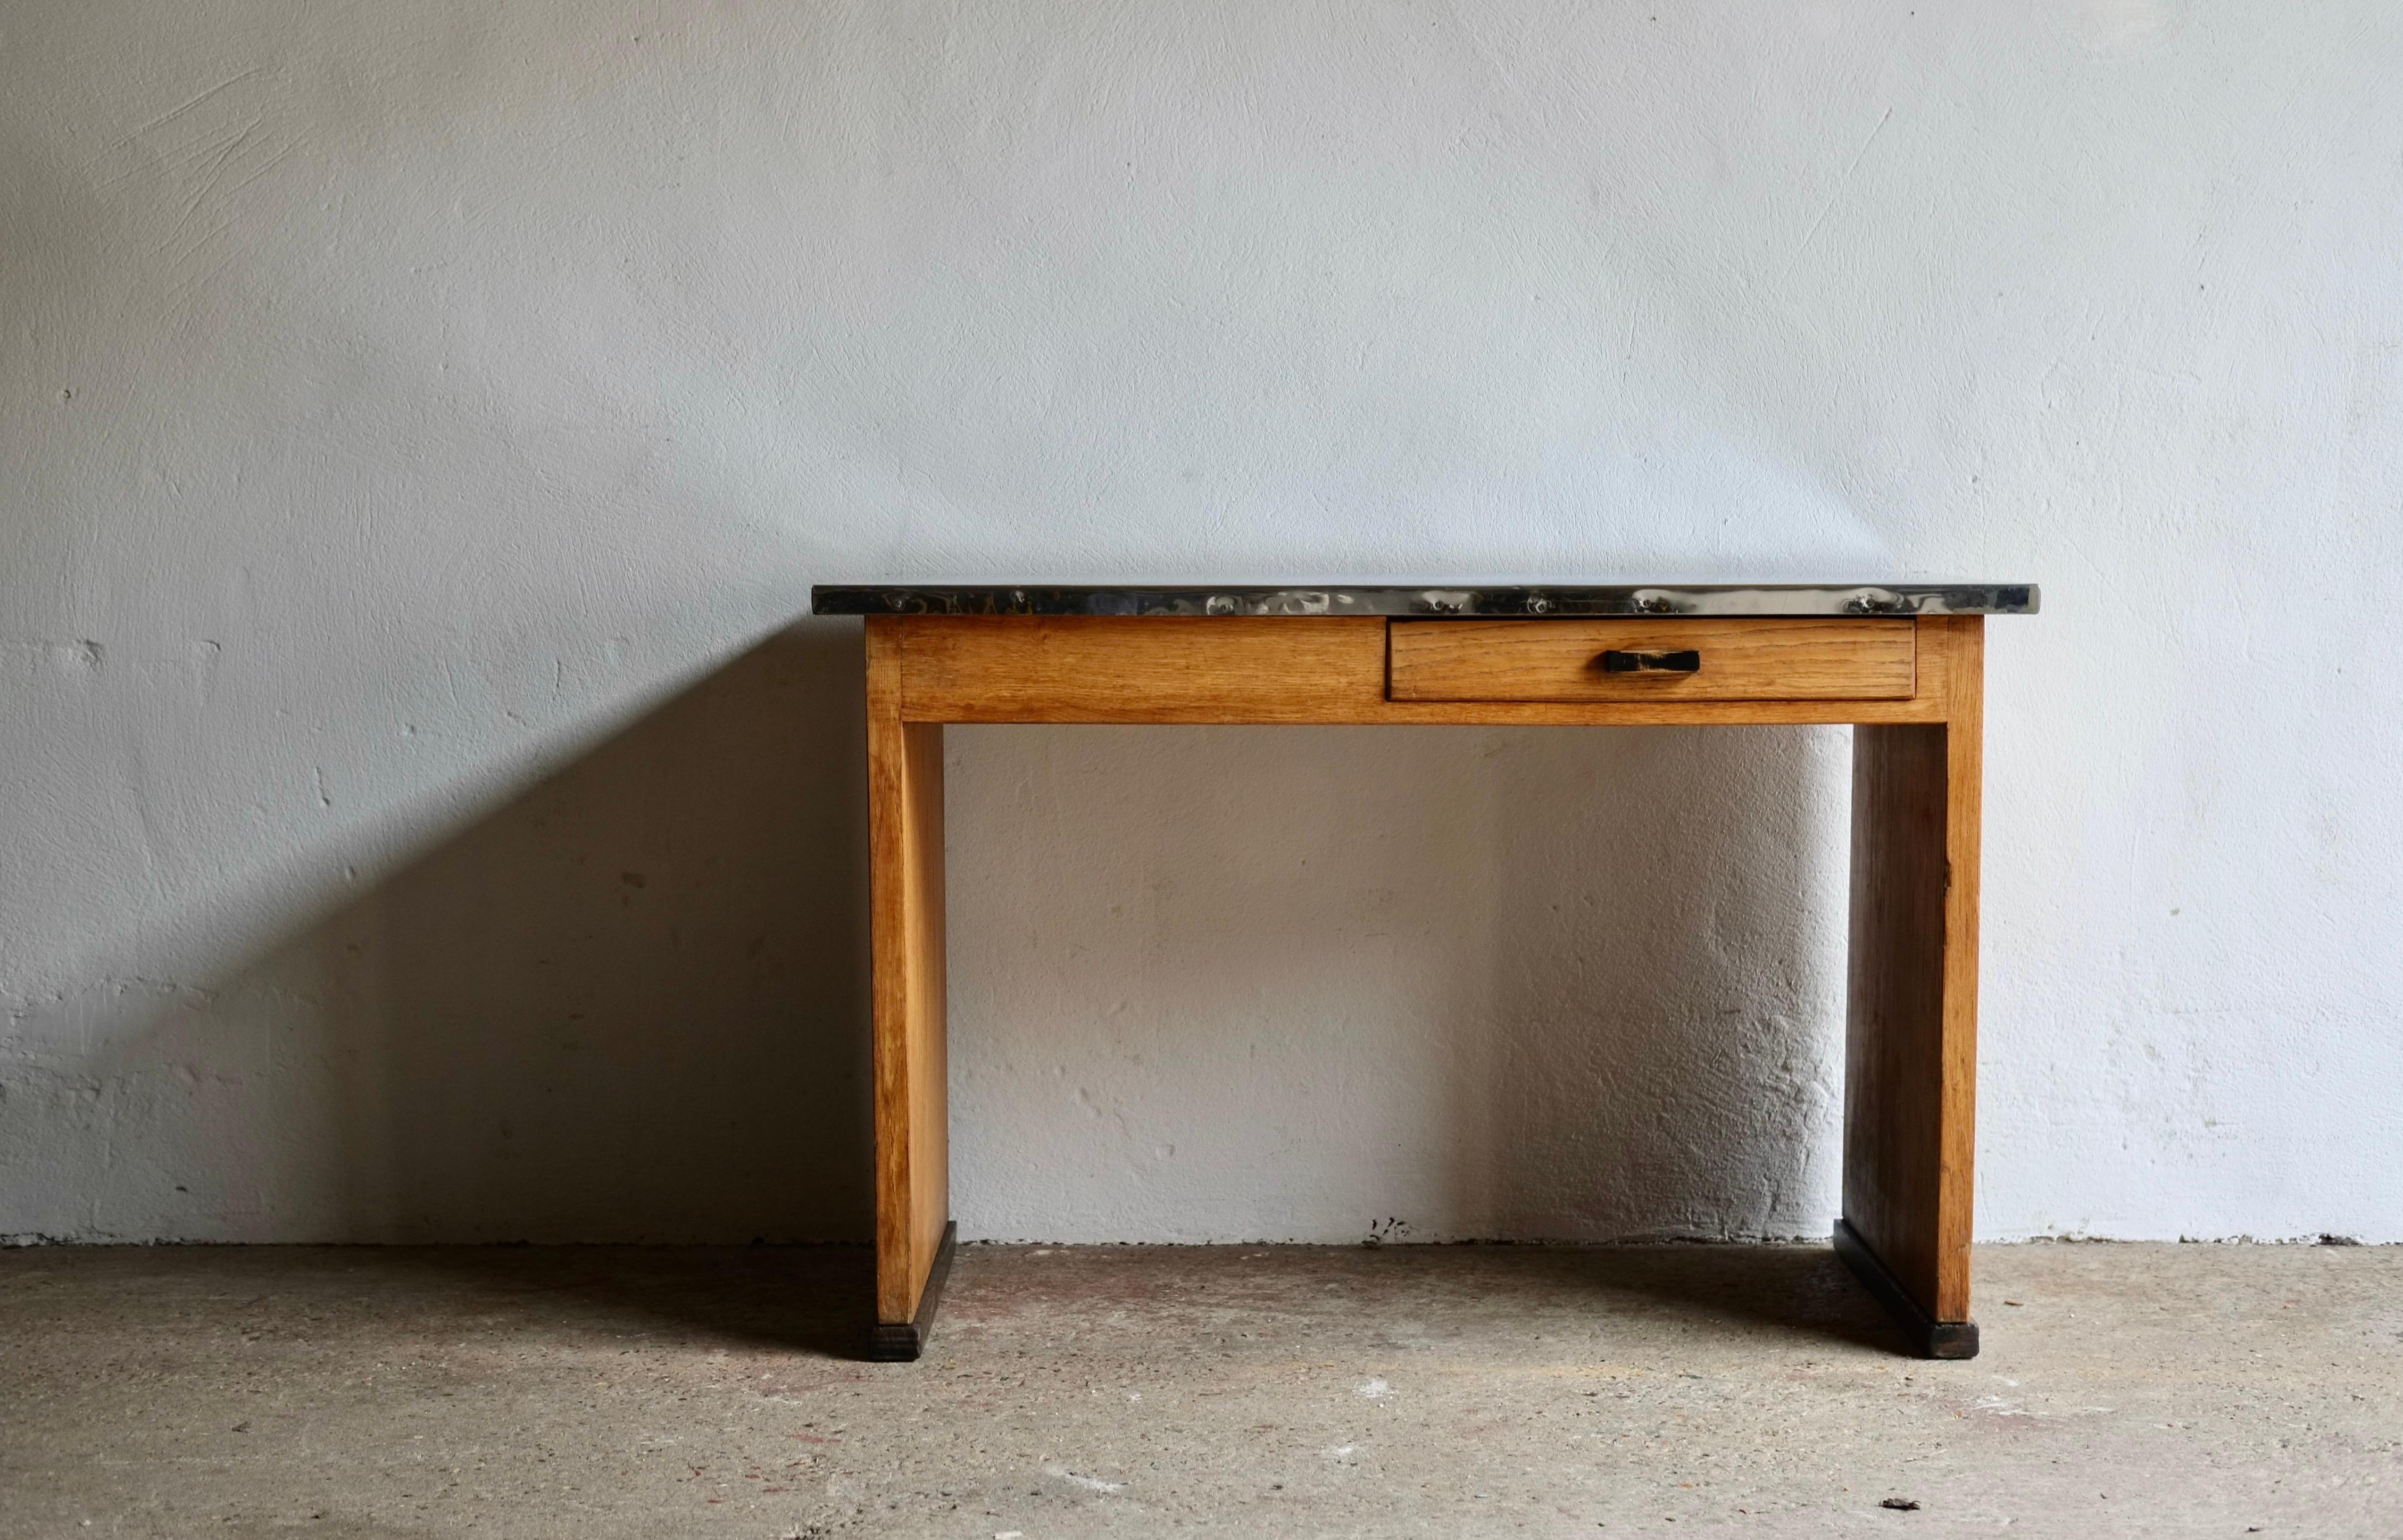 An early 20th century French modernist oak desk featuring a metal clad top and drawer. 

There is a beautiful patina to the desk which portrayed through the worn paintwork on the handle and the markings to the metal top. 

H 75 W 116 D 70.5 cm
